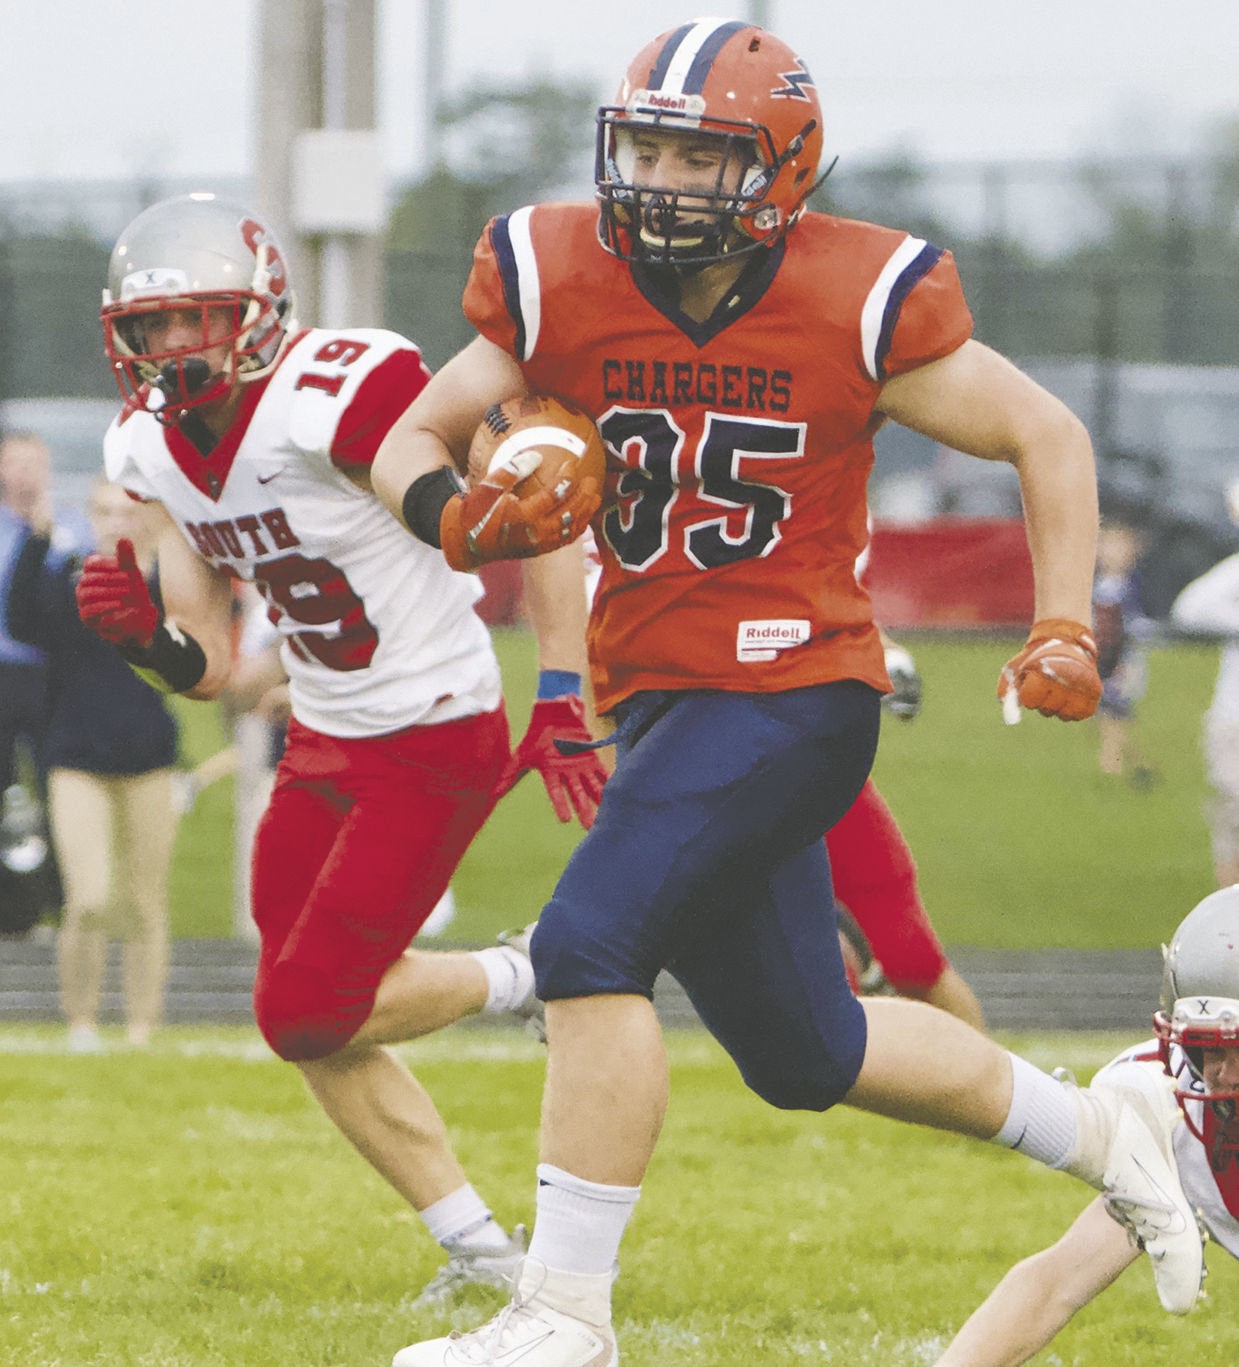 Jacob Braun runs the ball in a game earlier this season for the Chargers.